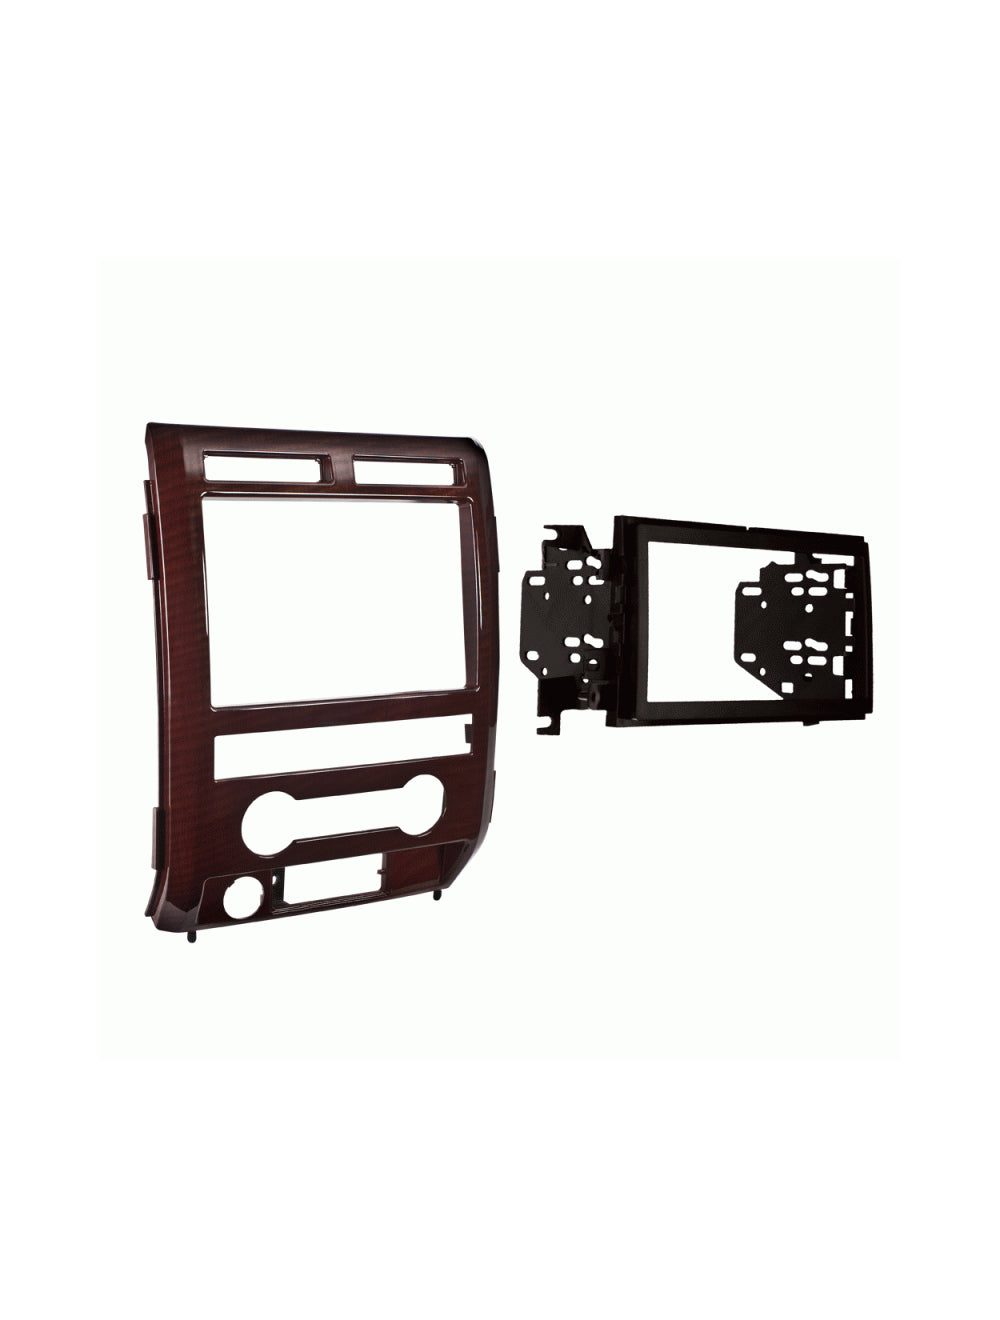 Metra 95-5822CM Double DIN Installation Dash Kit for 2009-2010 Ford F-150 King Ranch Non NAV Equipped Models